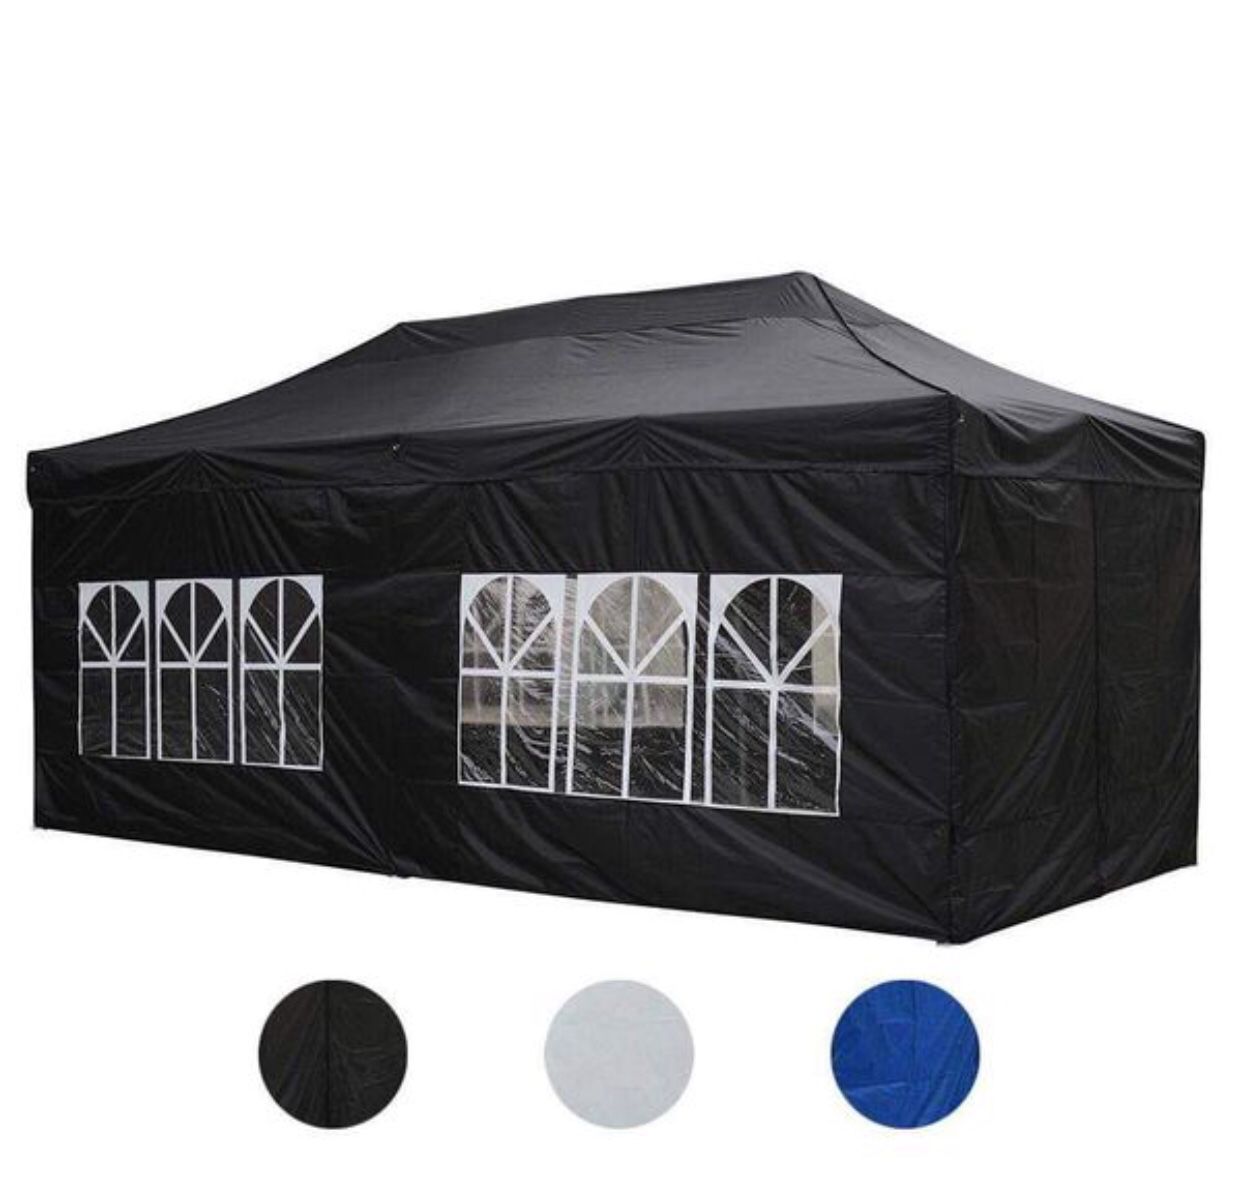 ☀️☀️☀️New Big Outdoor 10x20 Canopy Pop Up Tent - Perfect for outdoor events☀️☀️☀️Black & White Available